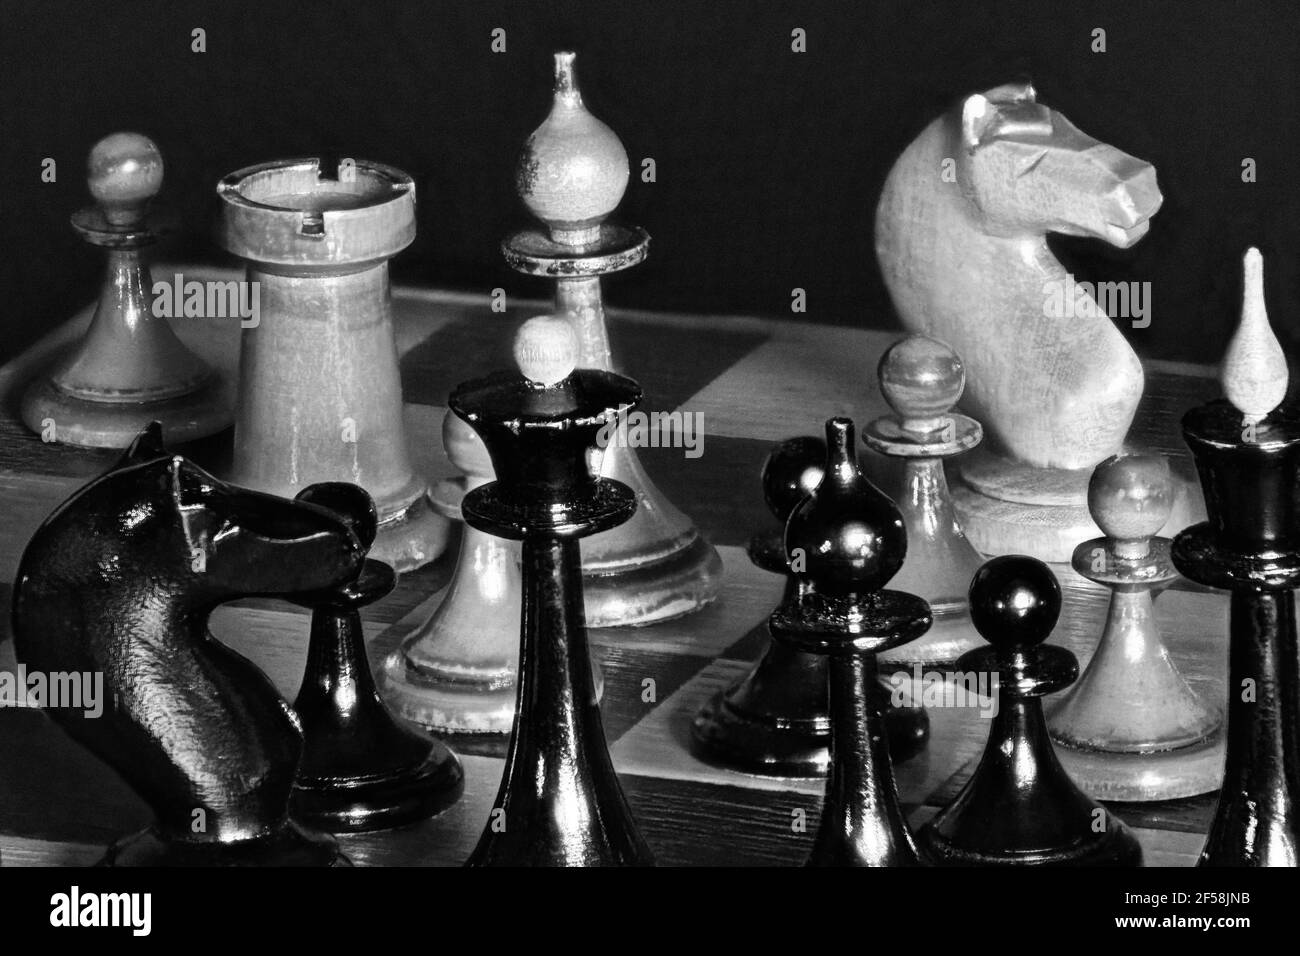 Chess board without chess pieces Imágenes de stock en blanco y negro - Alamy